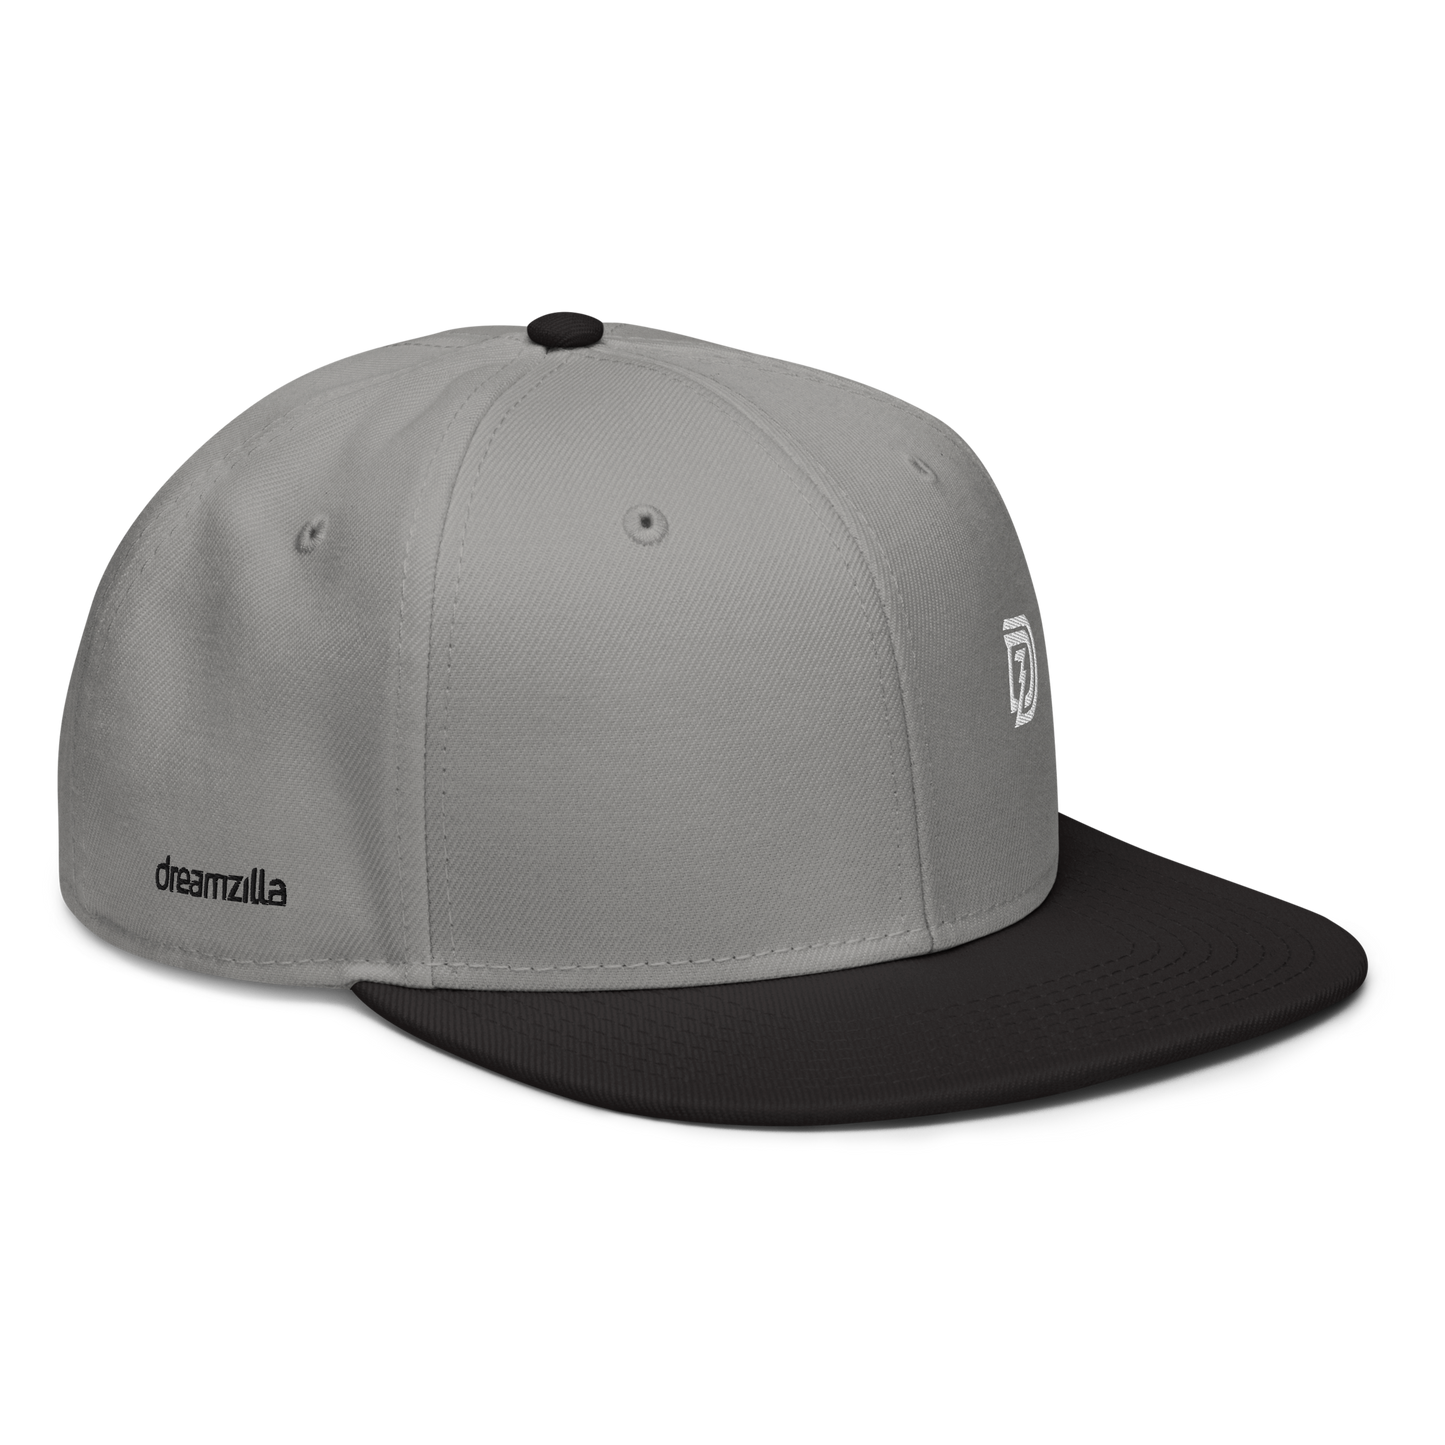 Angled View of DZ Monochrome Snapback in Gray with Black Brim